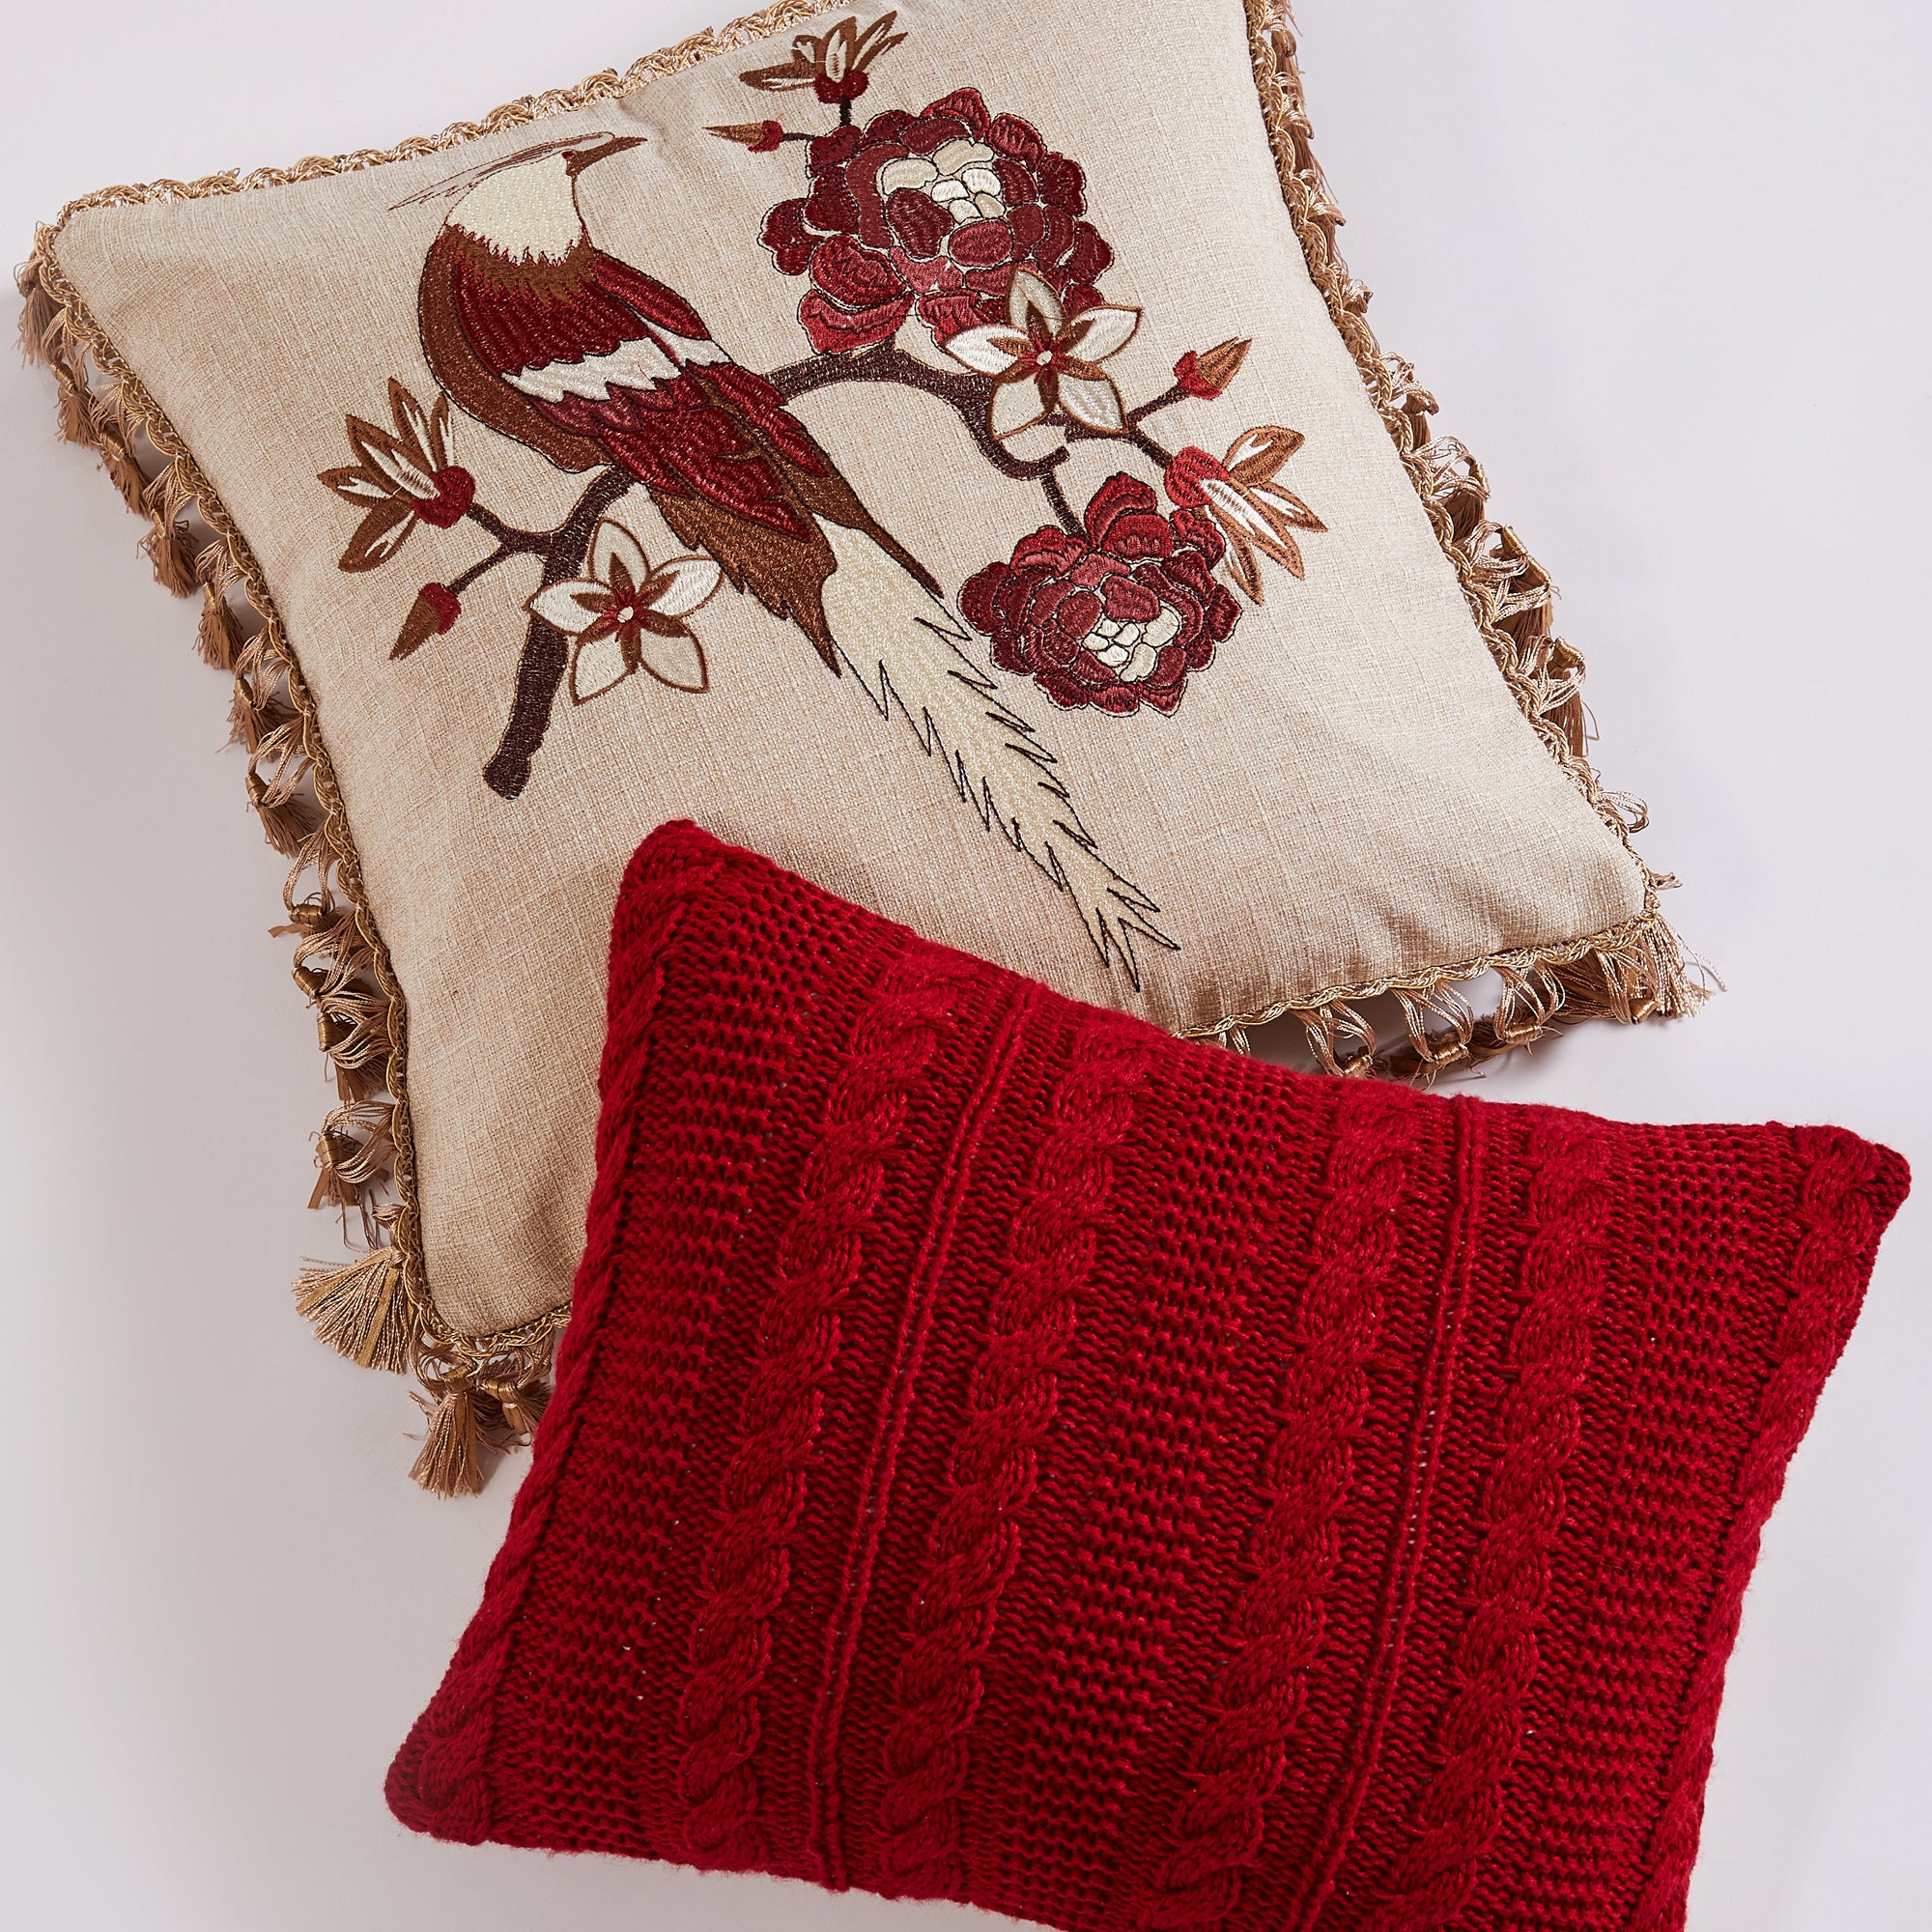 Astrid Cable Red Pillow